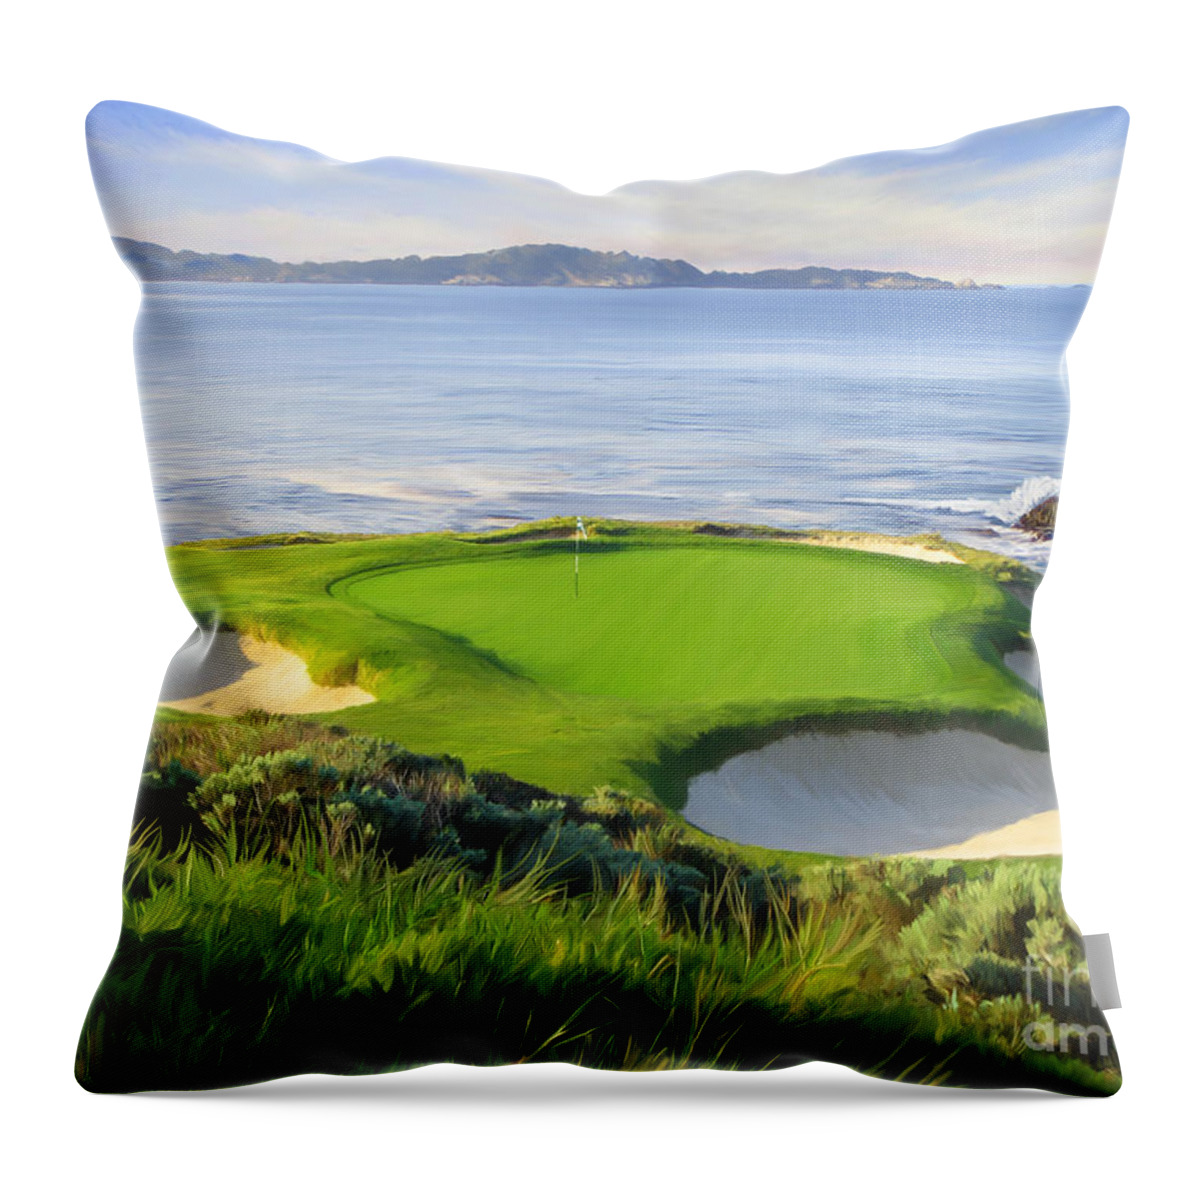 7th Hole Throw Pillow featuring the painting 7th Hole At Pebble Beach by Tim Gilliland